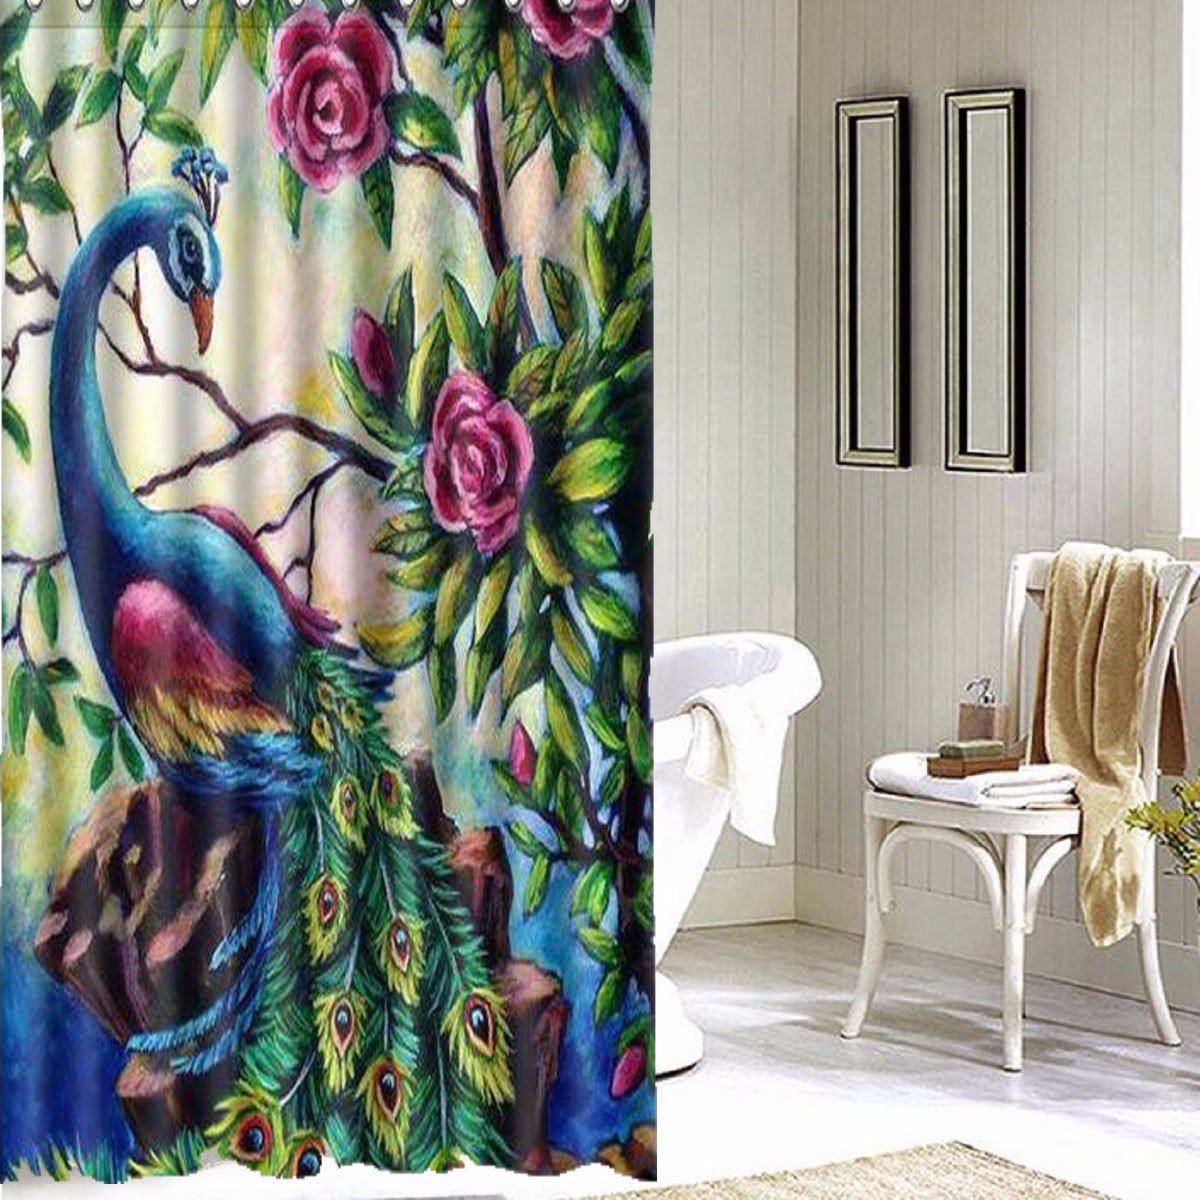 

150x180cm Colorful Flower Peacock Waterproof Bathroom Shower Curtain With 12 Hooks